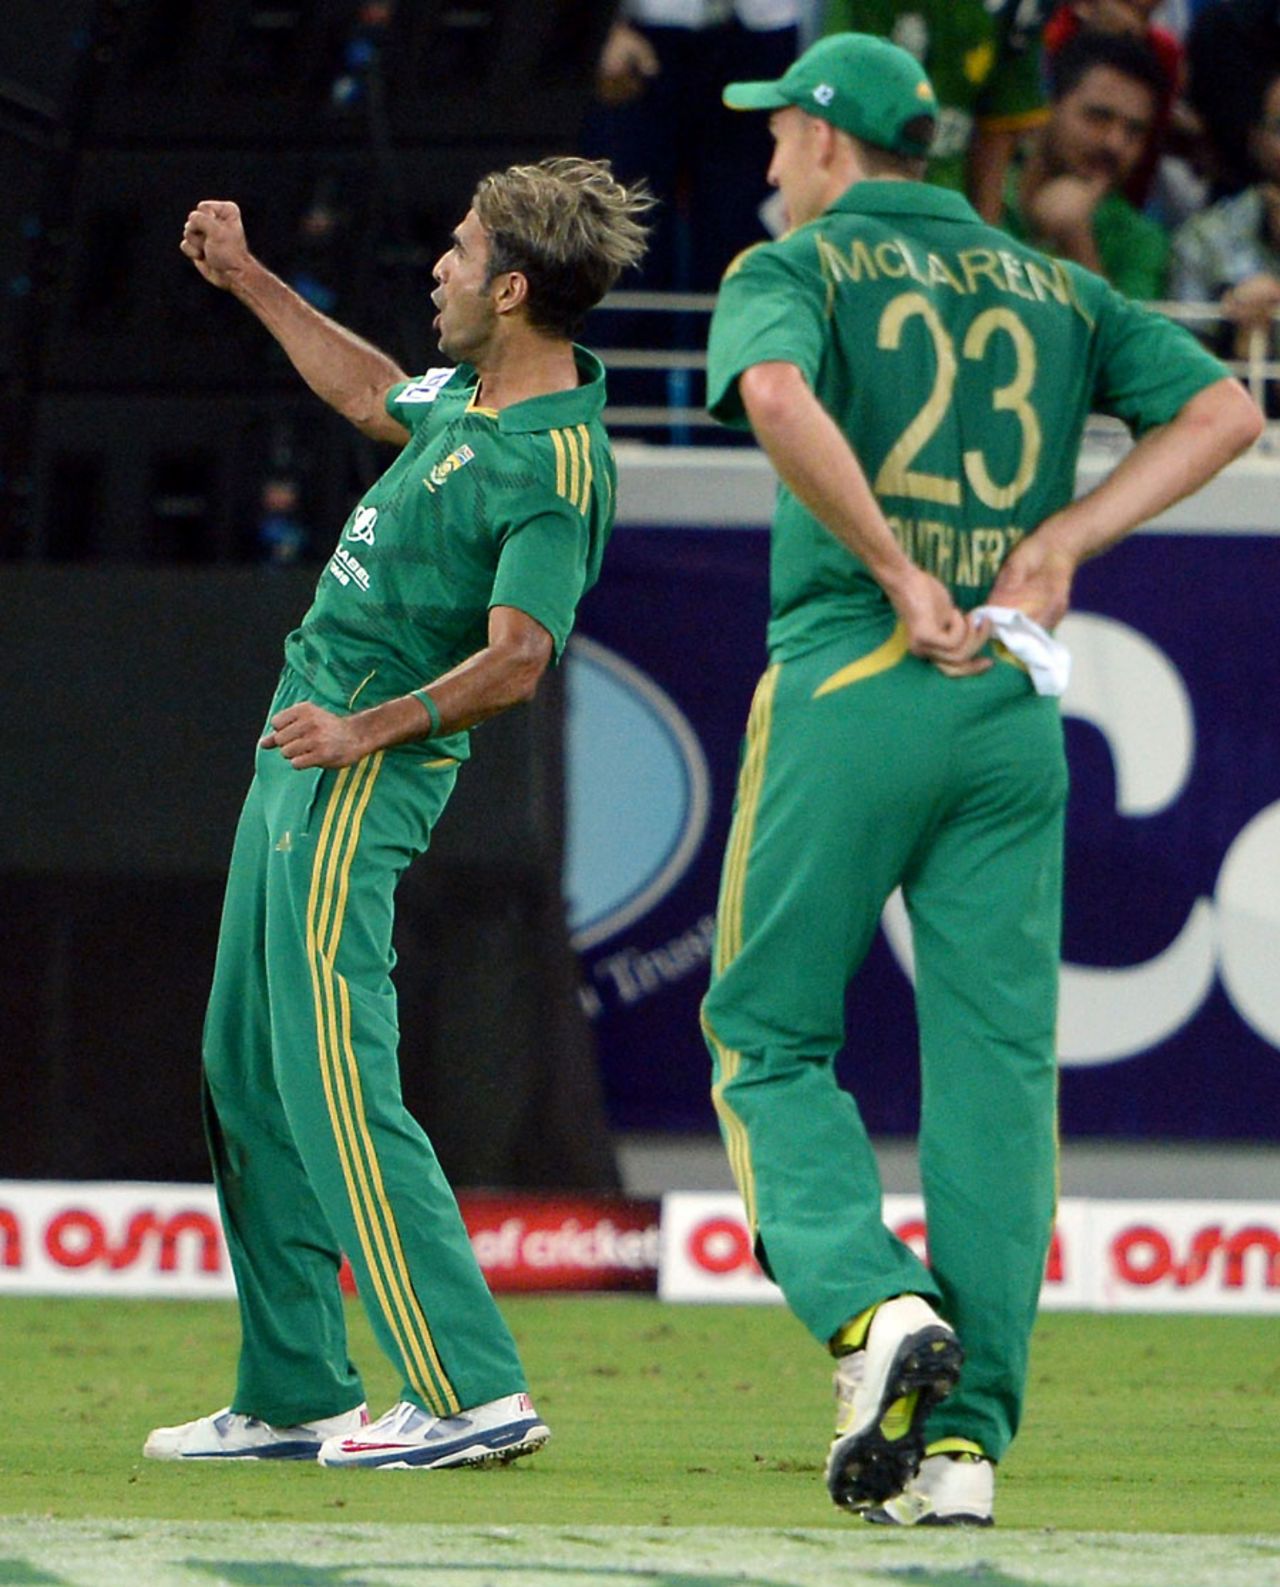 Imran Tahir rejoices after taking a wicket, Pakistan v South Africa, 2nd T20I, Dubai, November 15, 2013